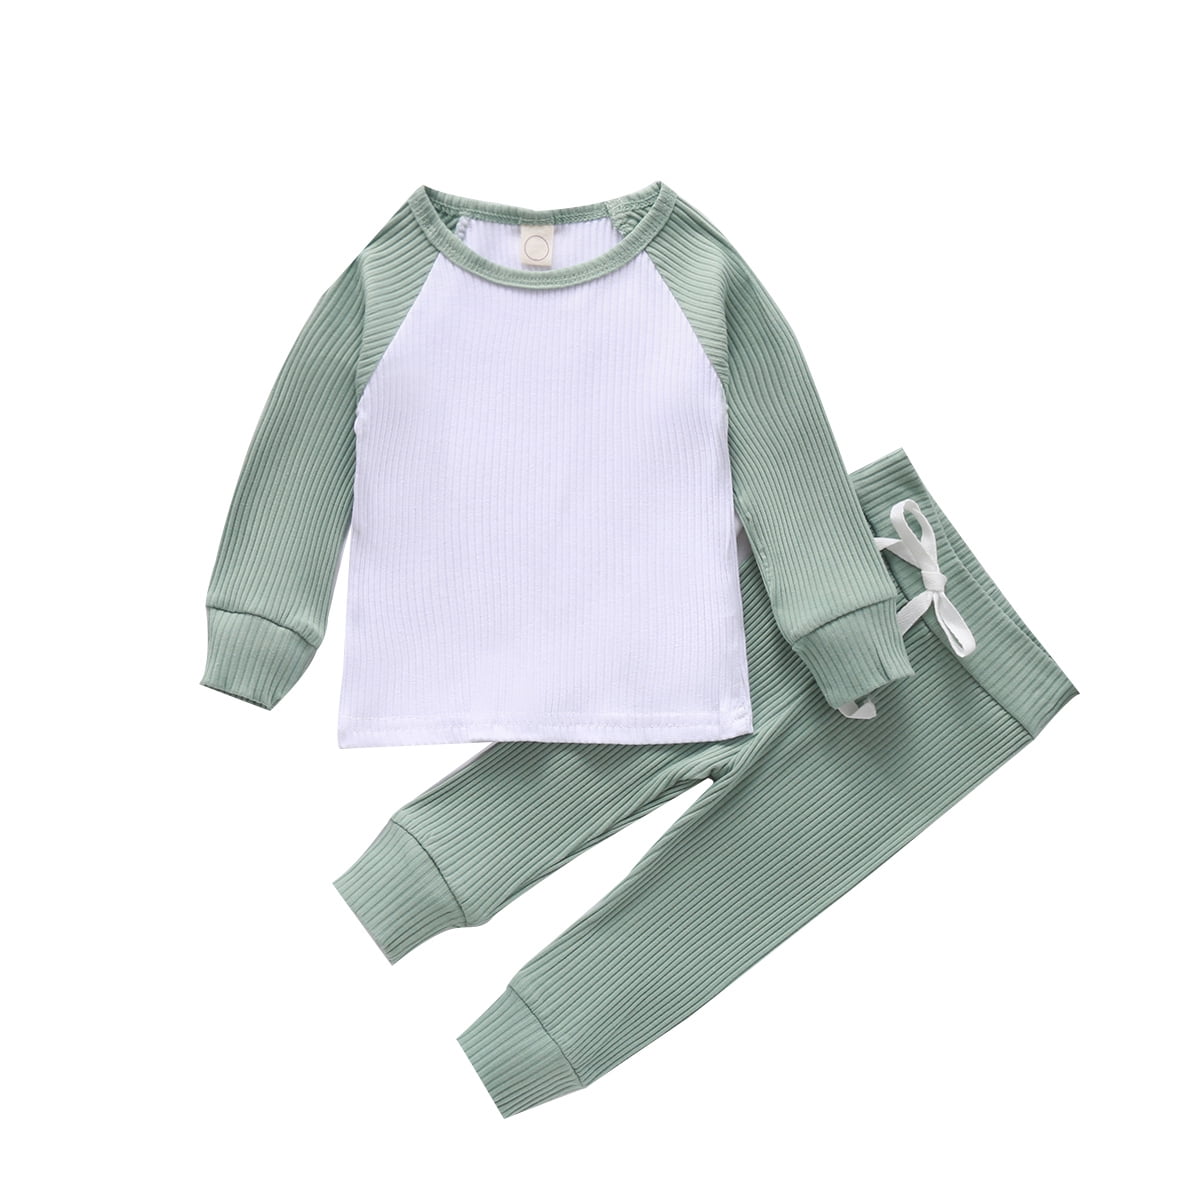 GRNSHTS Baby Boys Girls Jumpsuit Unisex Toddler Long Sleeve with Pocket Autumn Winter Outfit